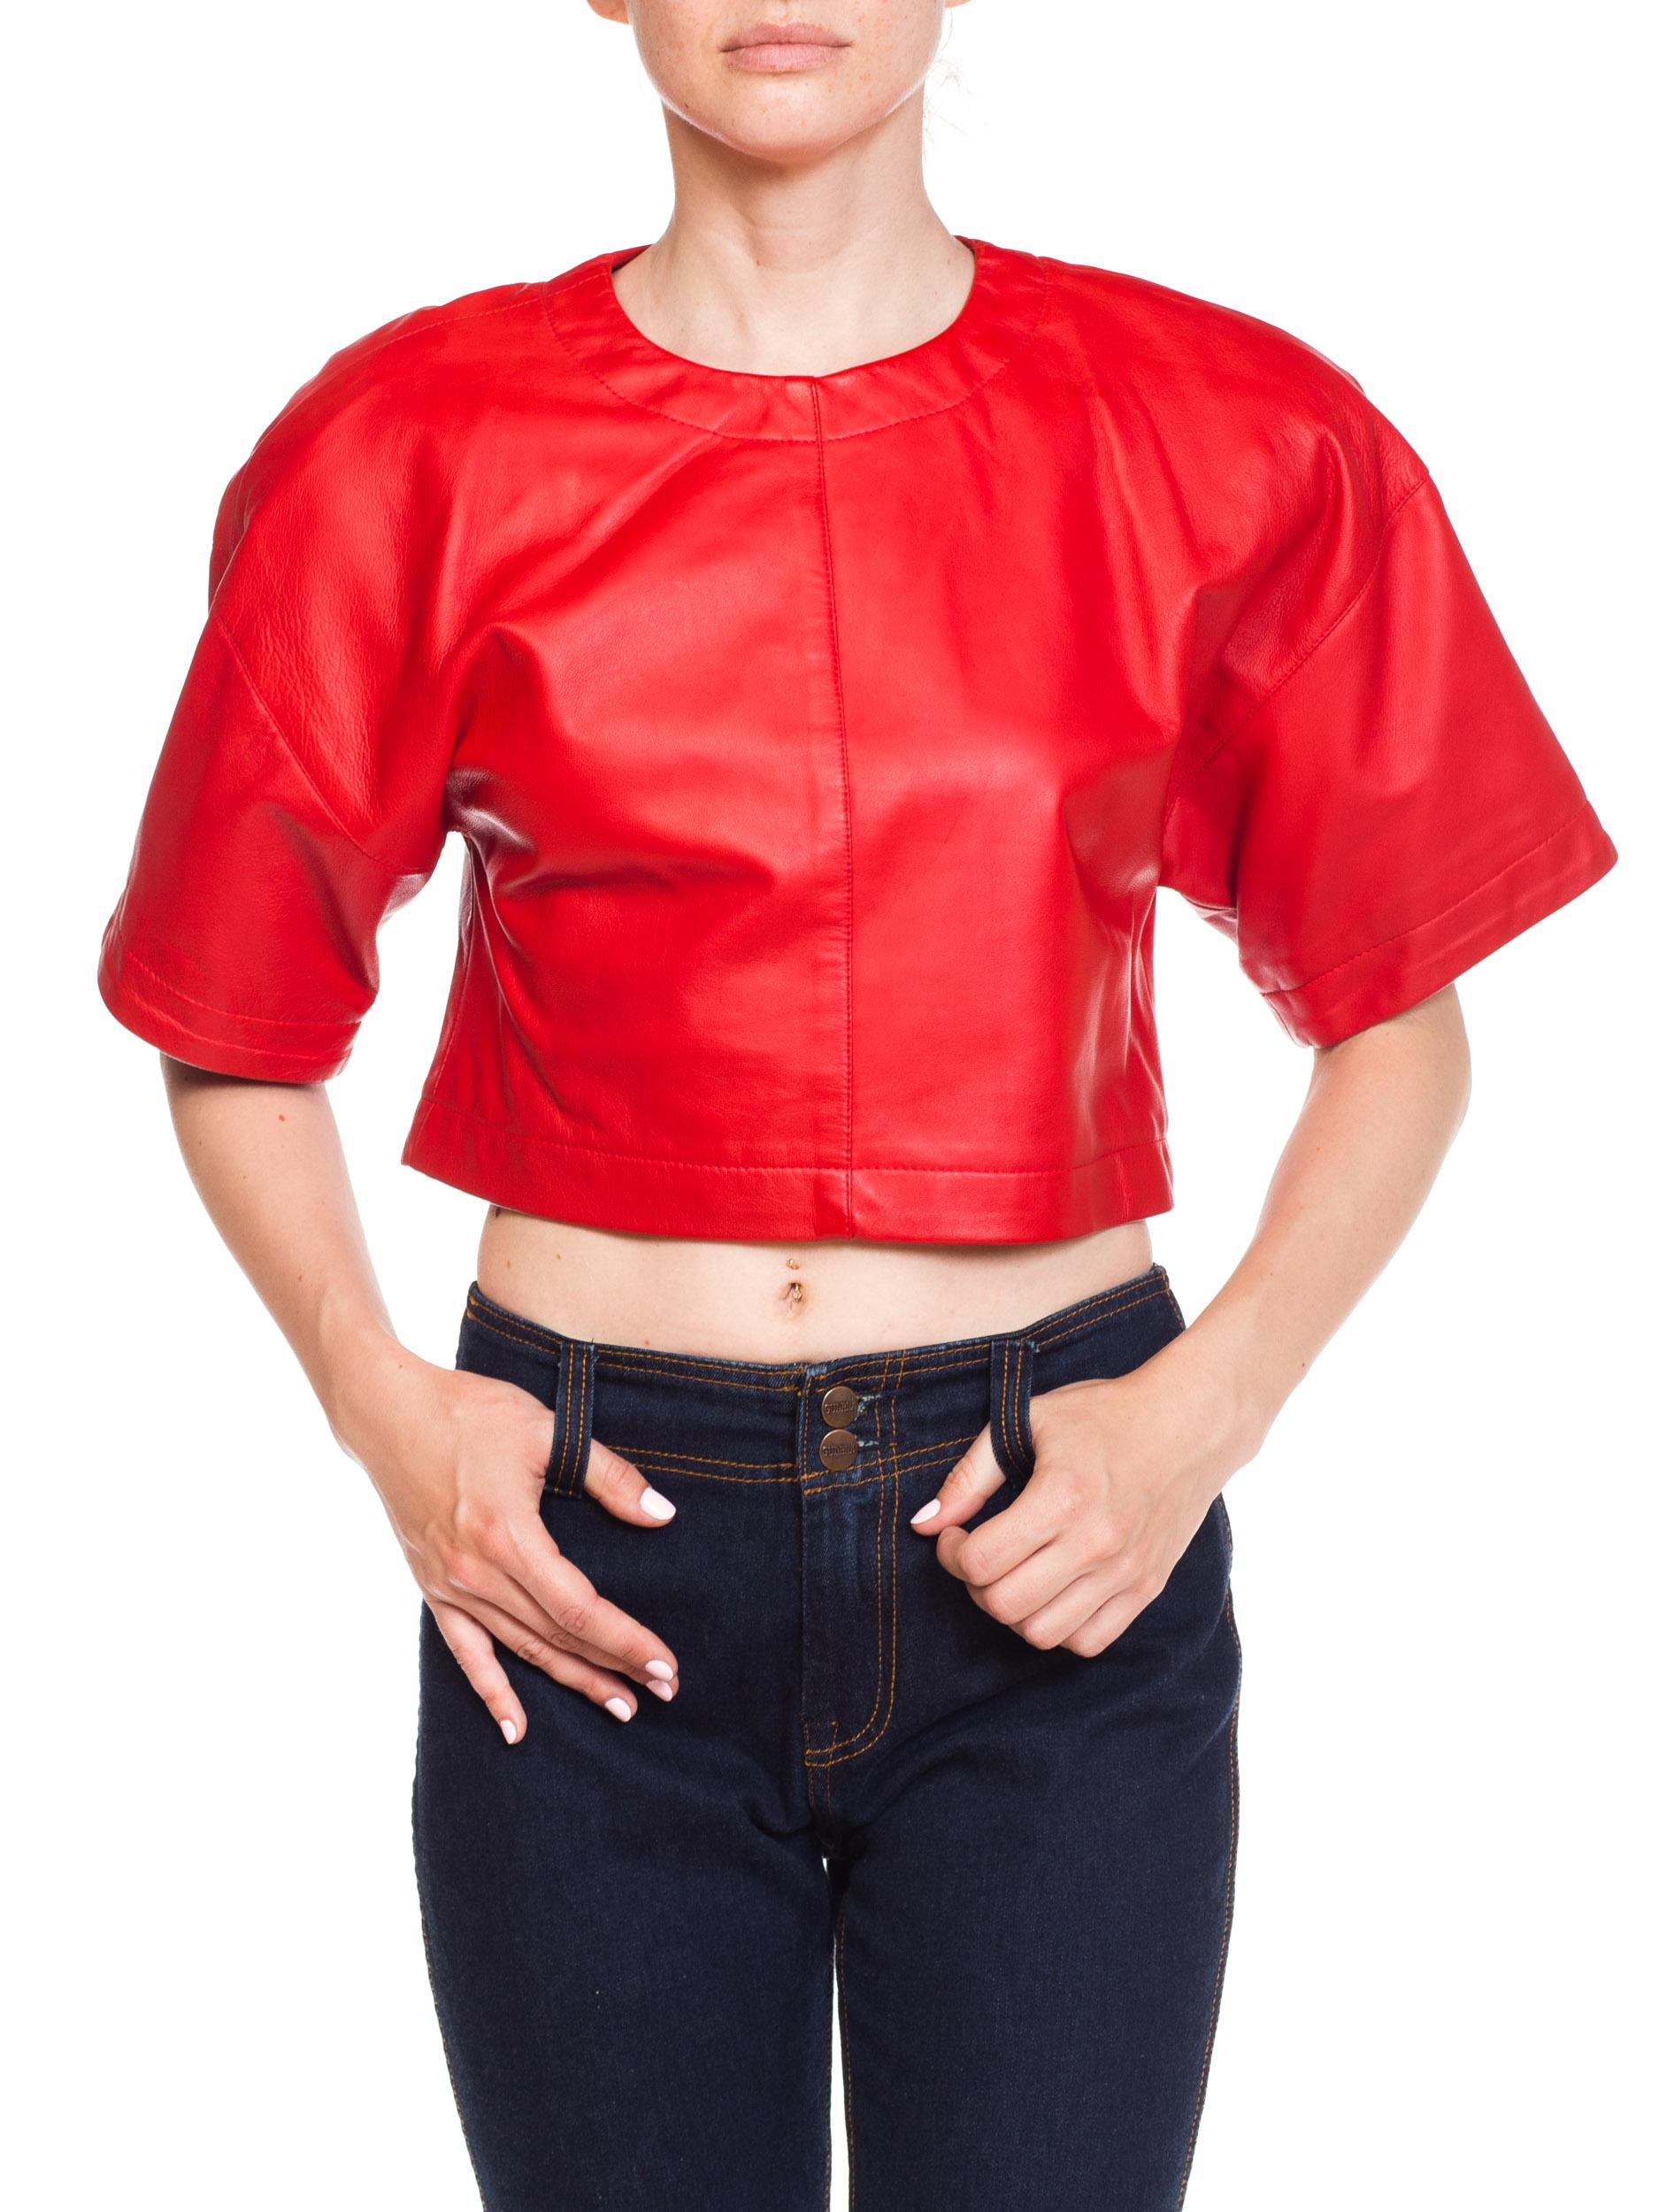 1980s Red Leather Oversized Crop Top 6